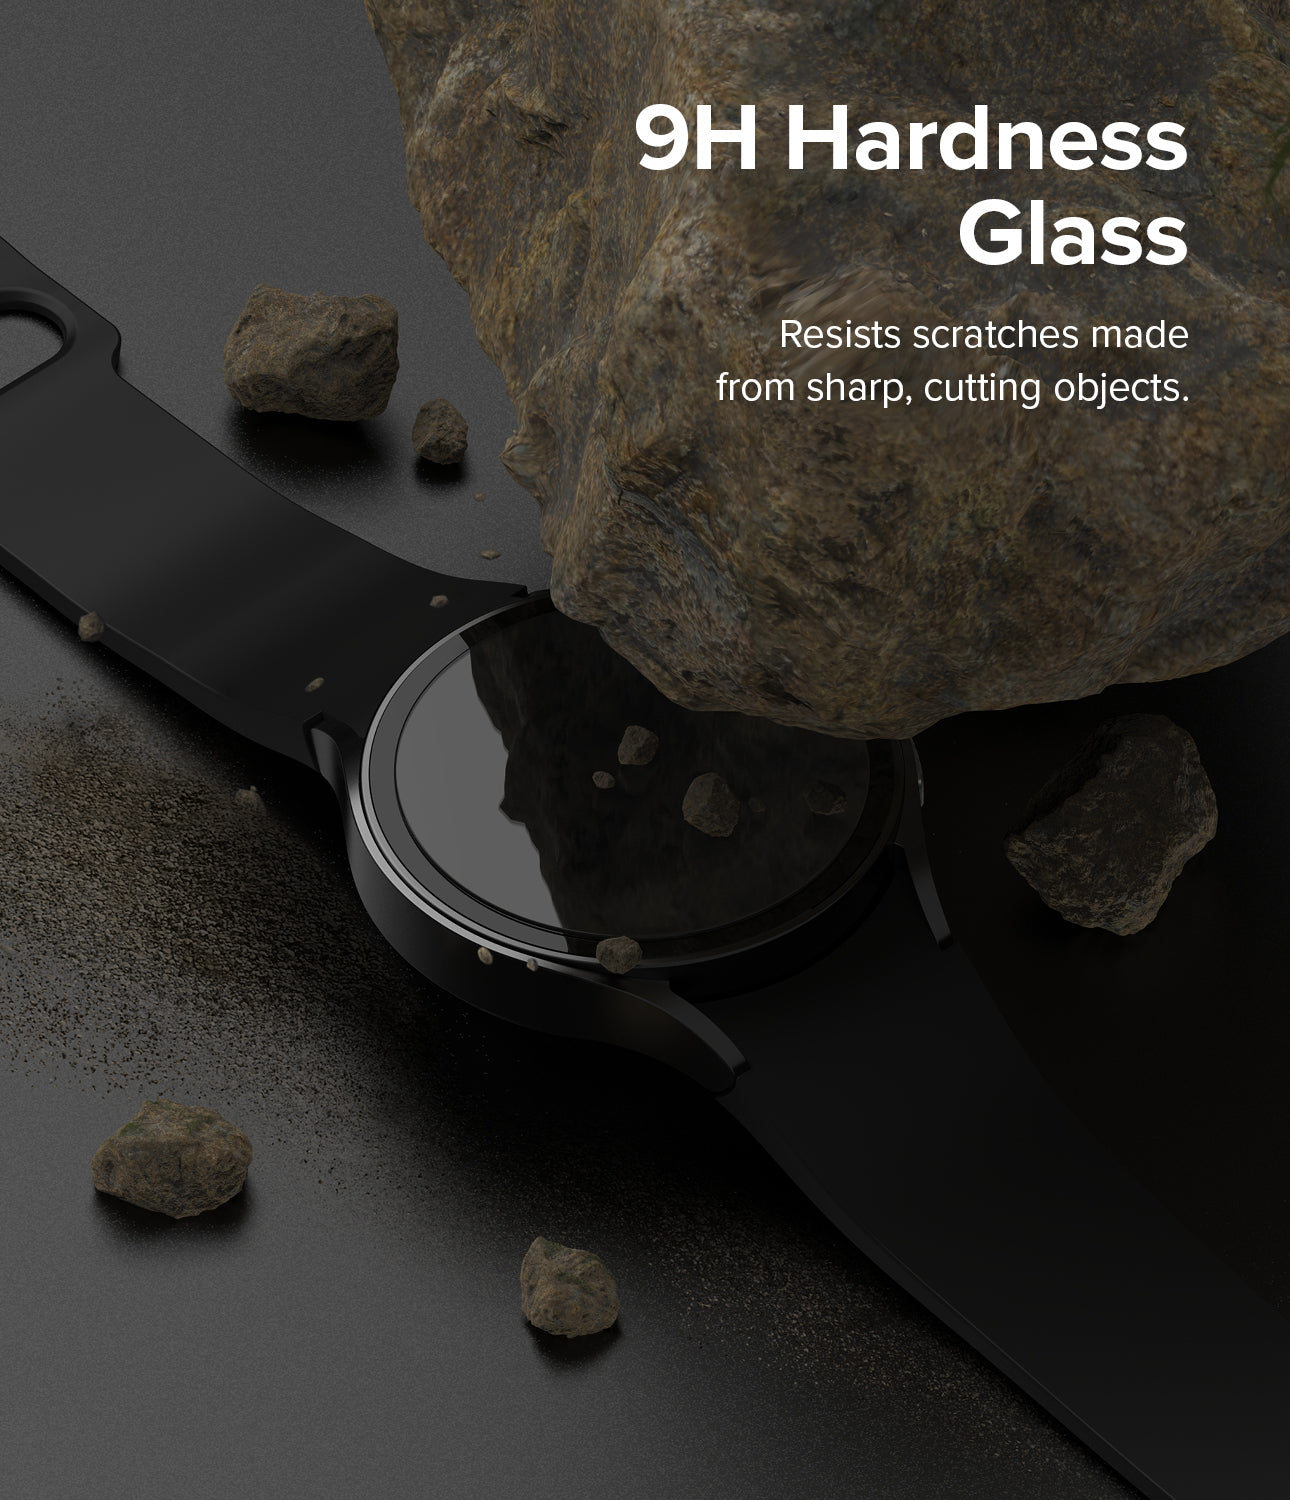 Galaxy Watch 6 40mm Screen Protector | Glass - R8 - 9H Hardness Glass. Resists scratches made from sharp, cutting objects.